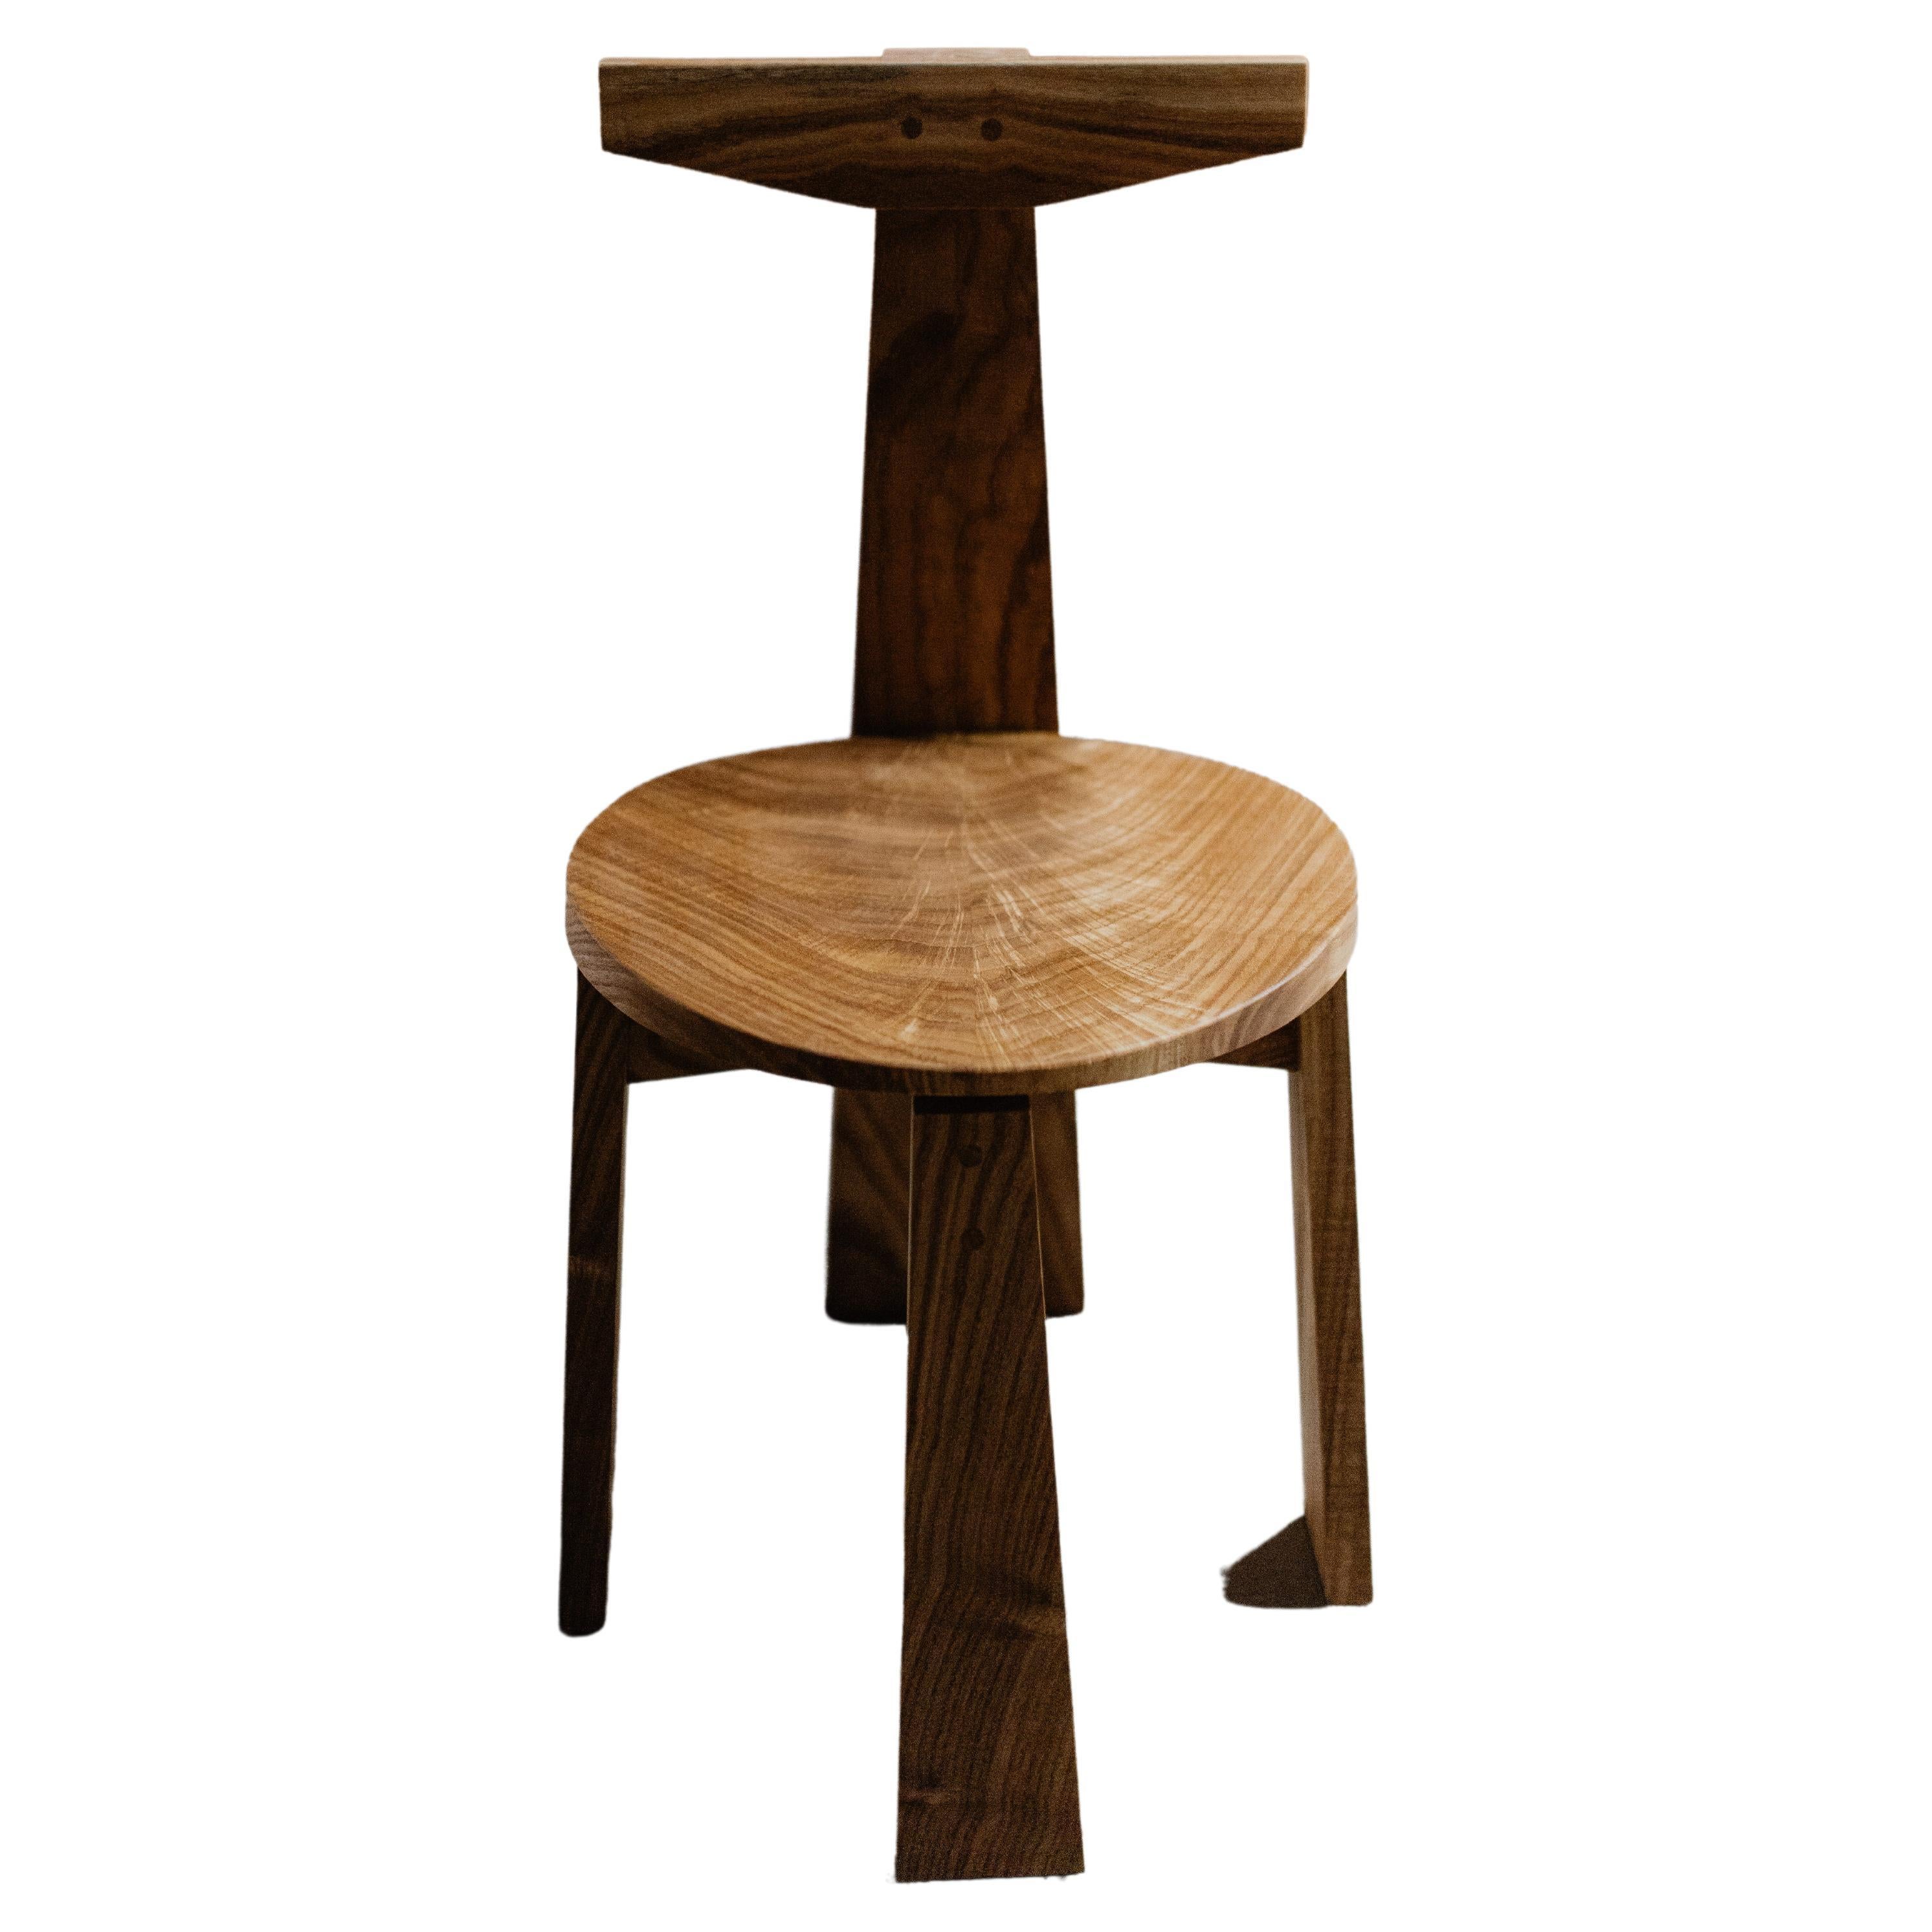 Urithi 4 Leg Dining Chair by Albert Potgieter Designs For Sale